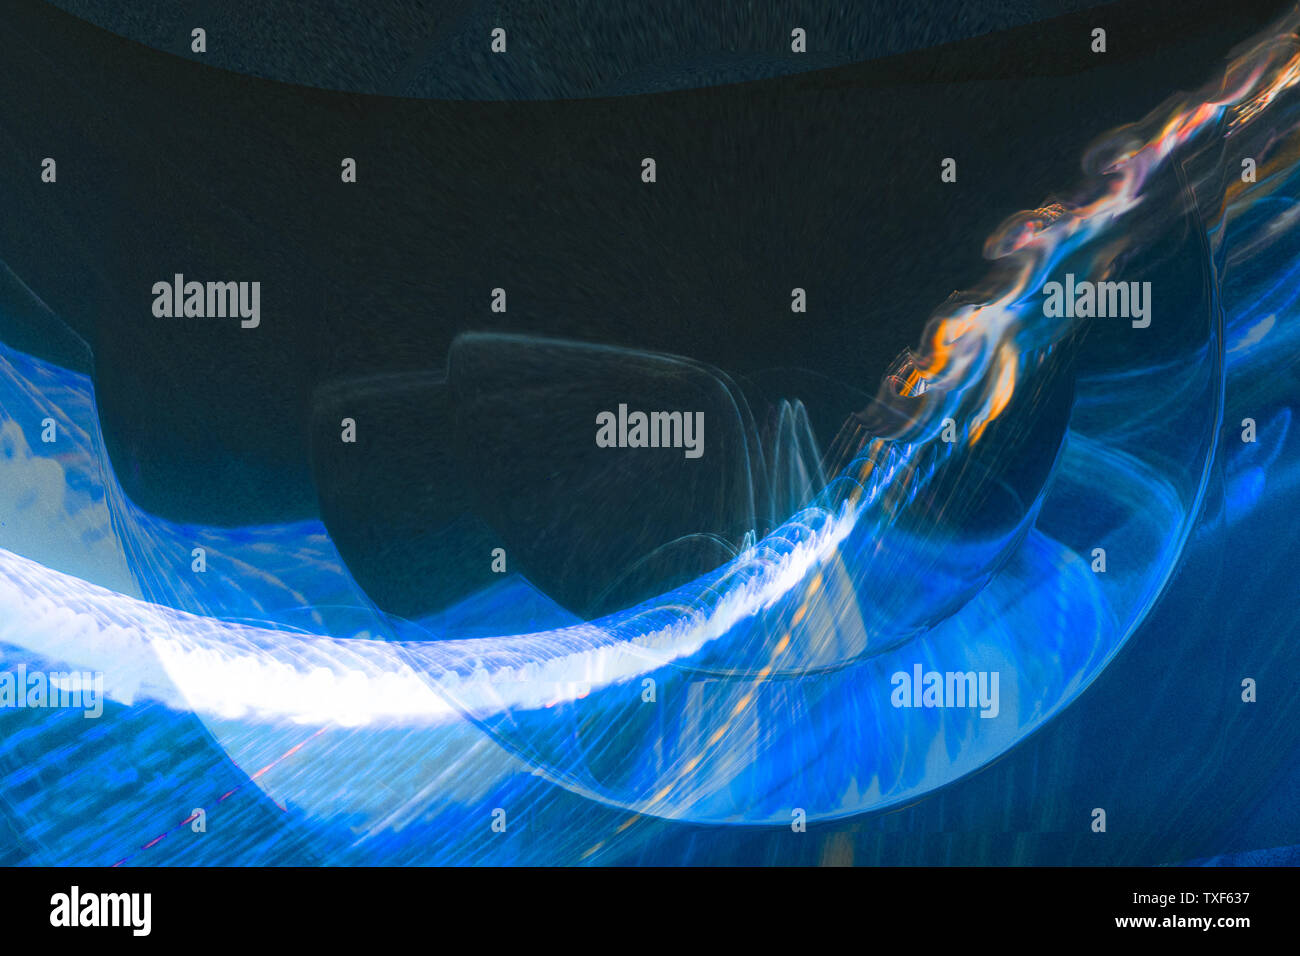 Beautiful, artist drawn. abstract illustration of a digital wave with electric blue and white lights and space for words. Suggested uses: technology. Stock Photo